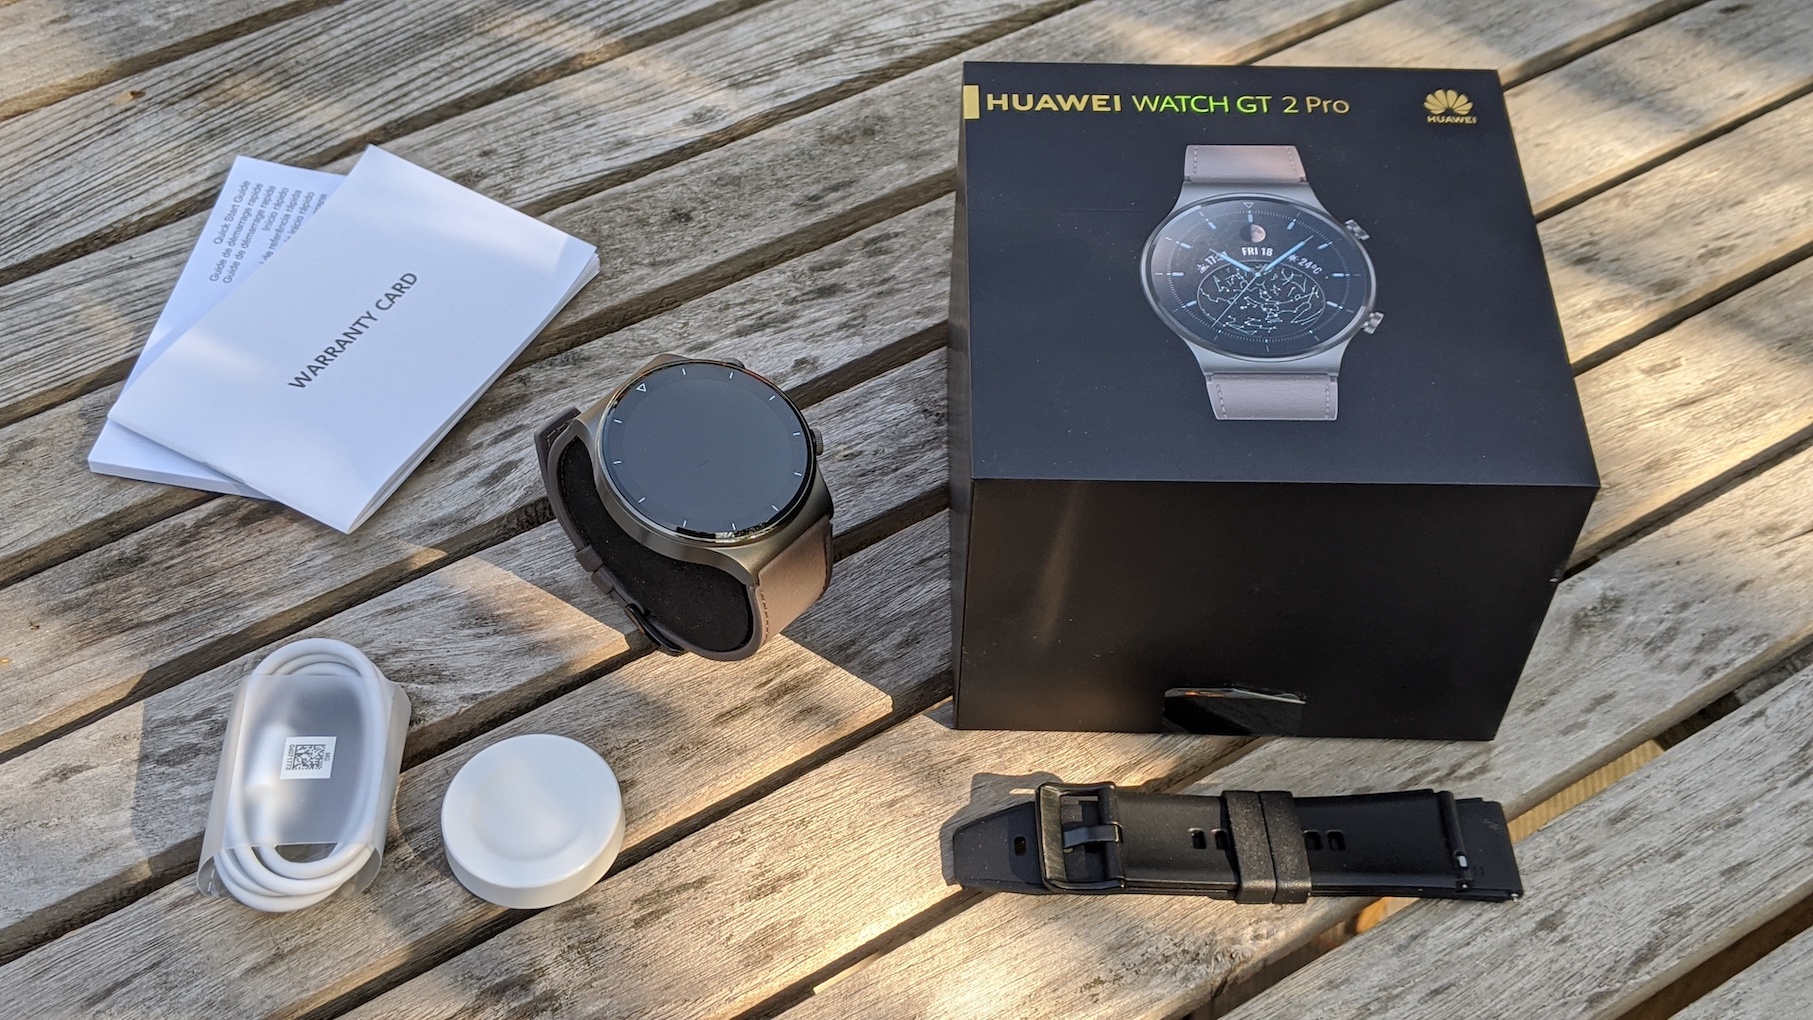 Huawei Watch GT 2 Pro review: Optimized design and improved